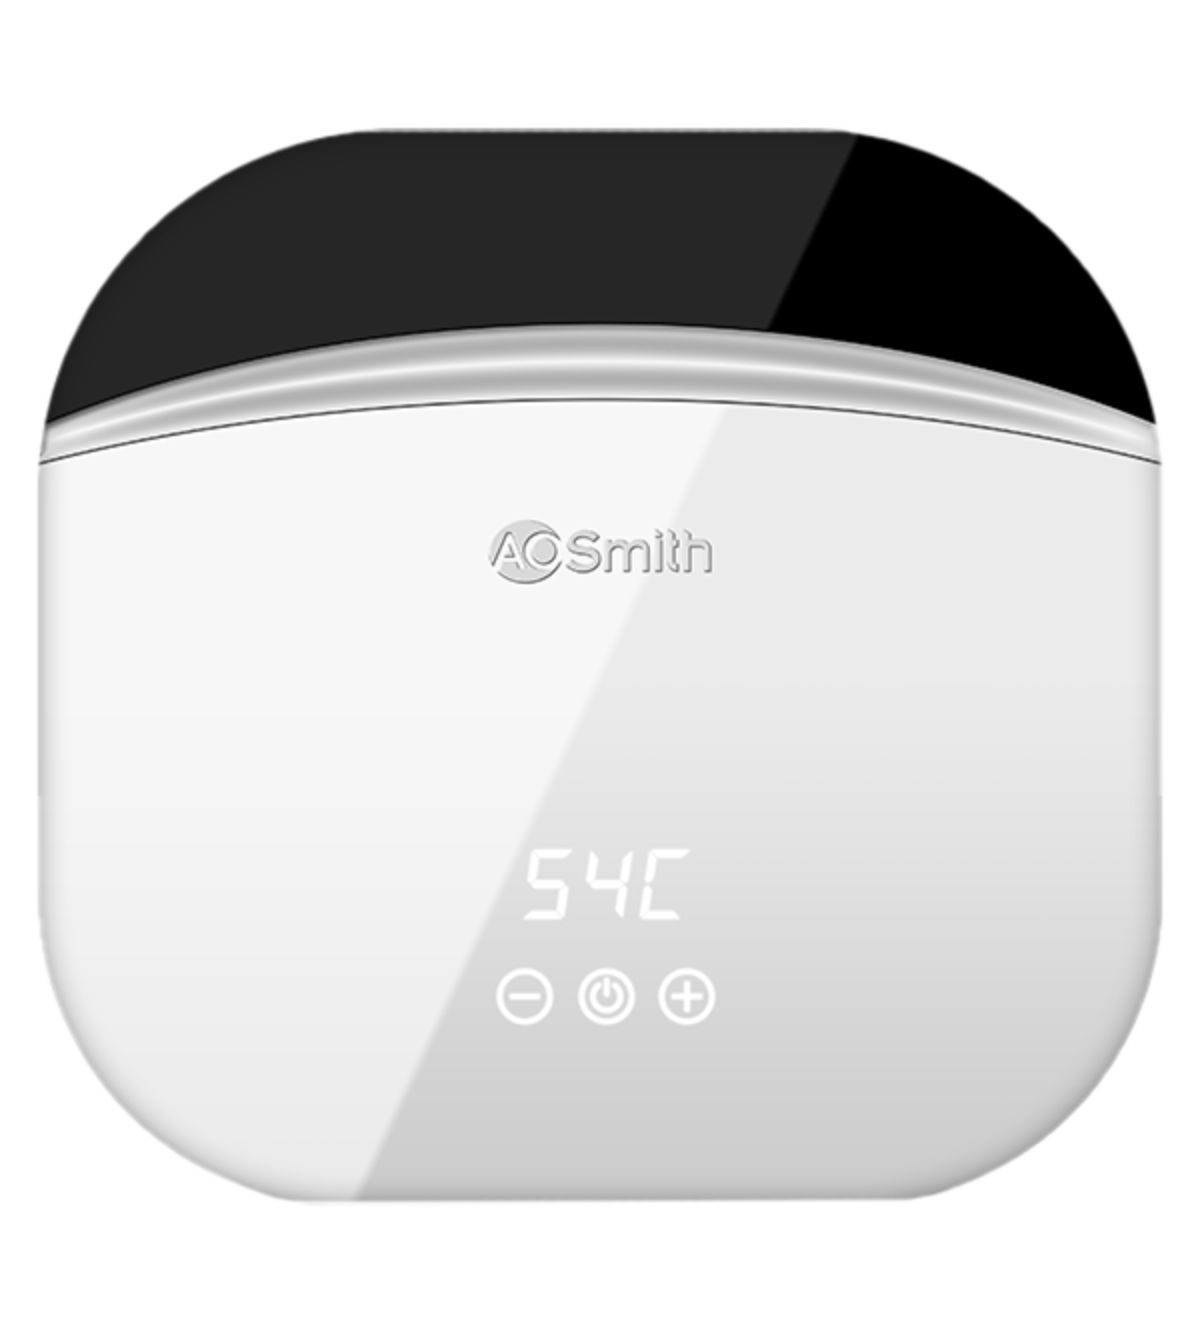 ZIP Digital Tankless Geyser Water Heaters - A. O. Smith India